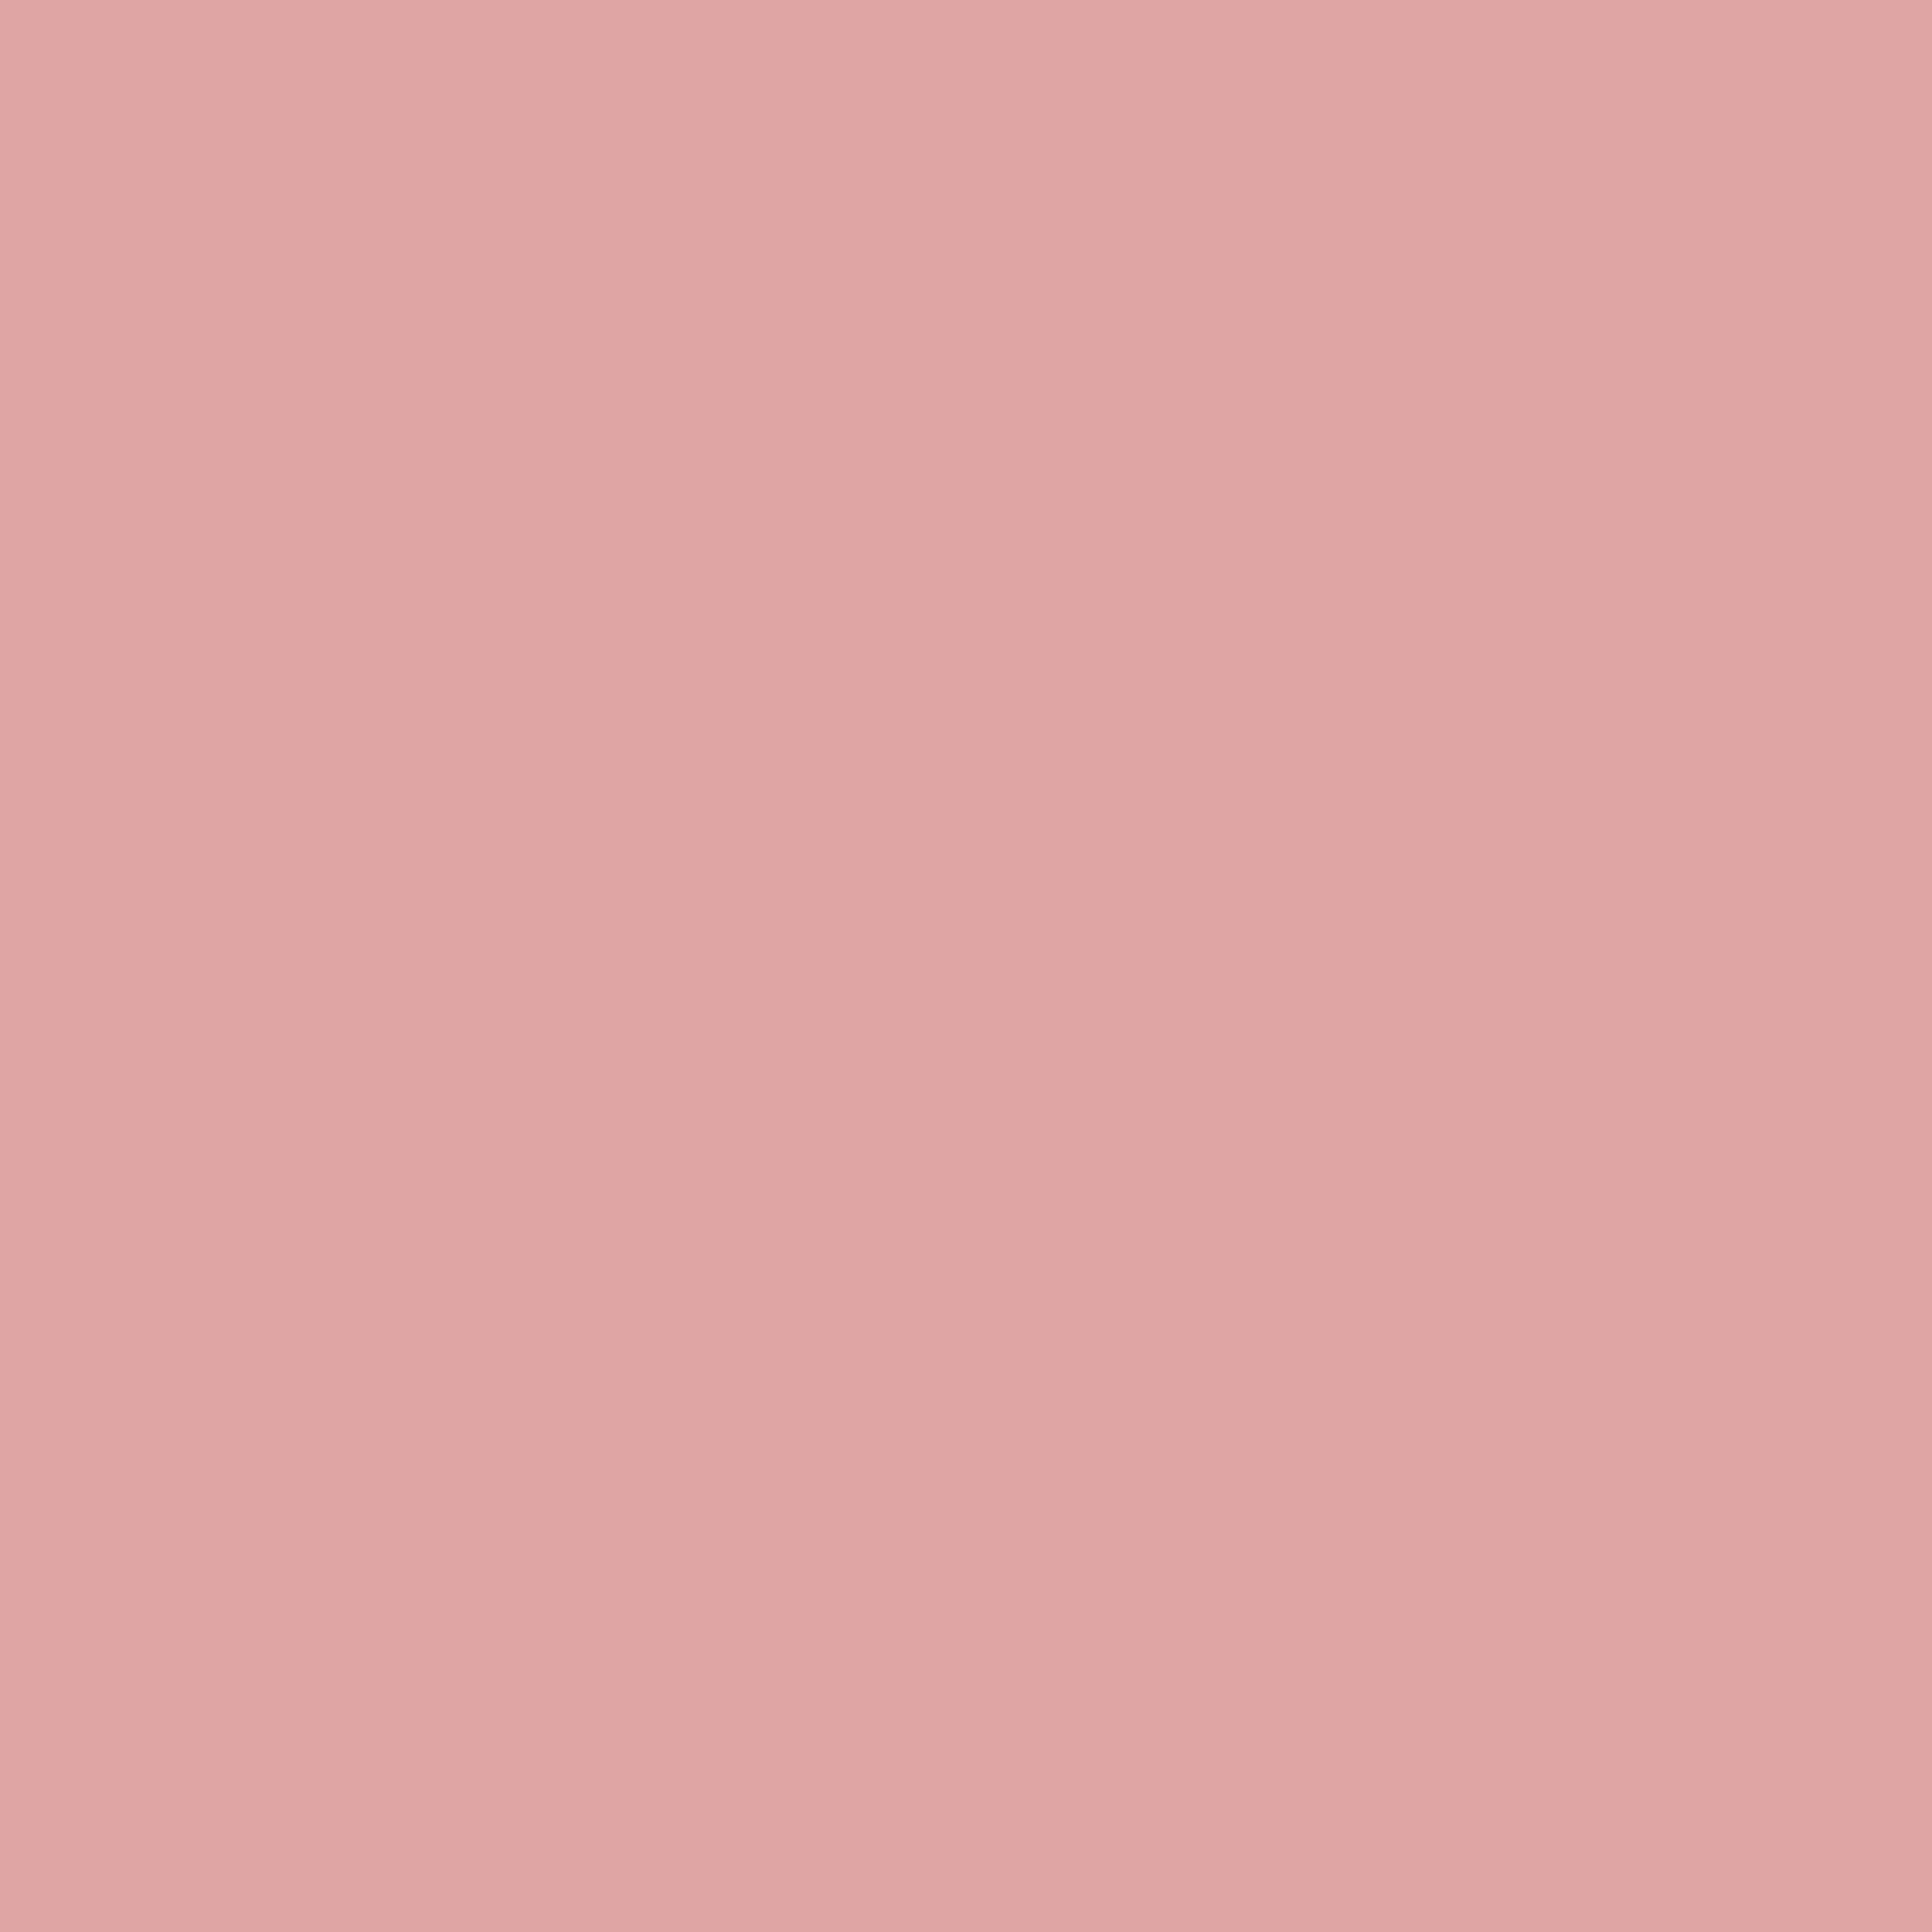 2732x2732 Pastel Pink Solid Color Background